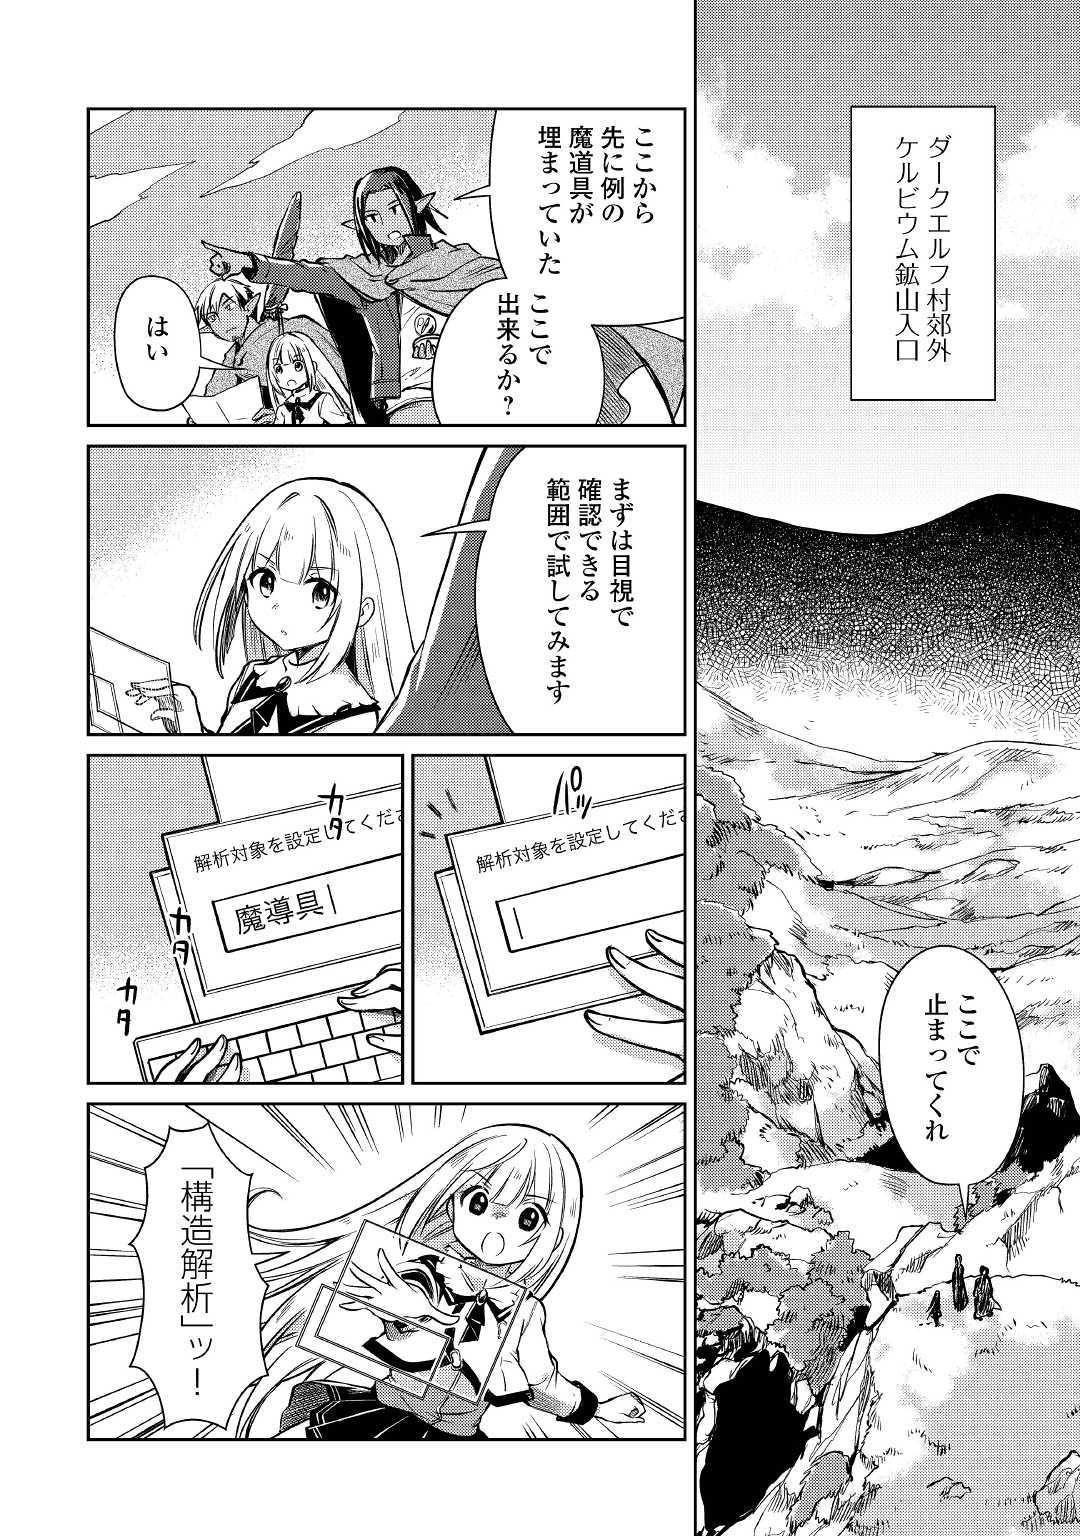 The Former Structural Researcher’s Story of Otherworldly Adventure 第20話 - Page 2